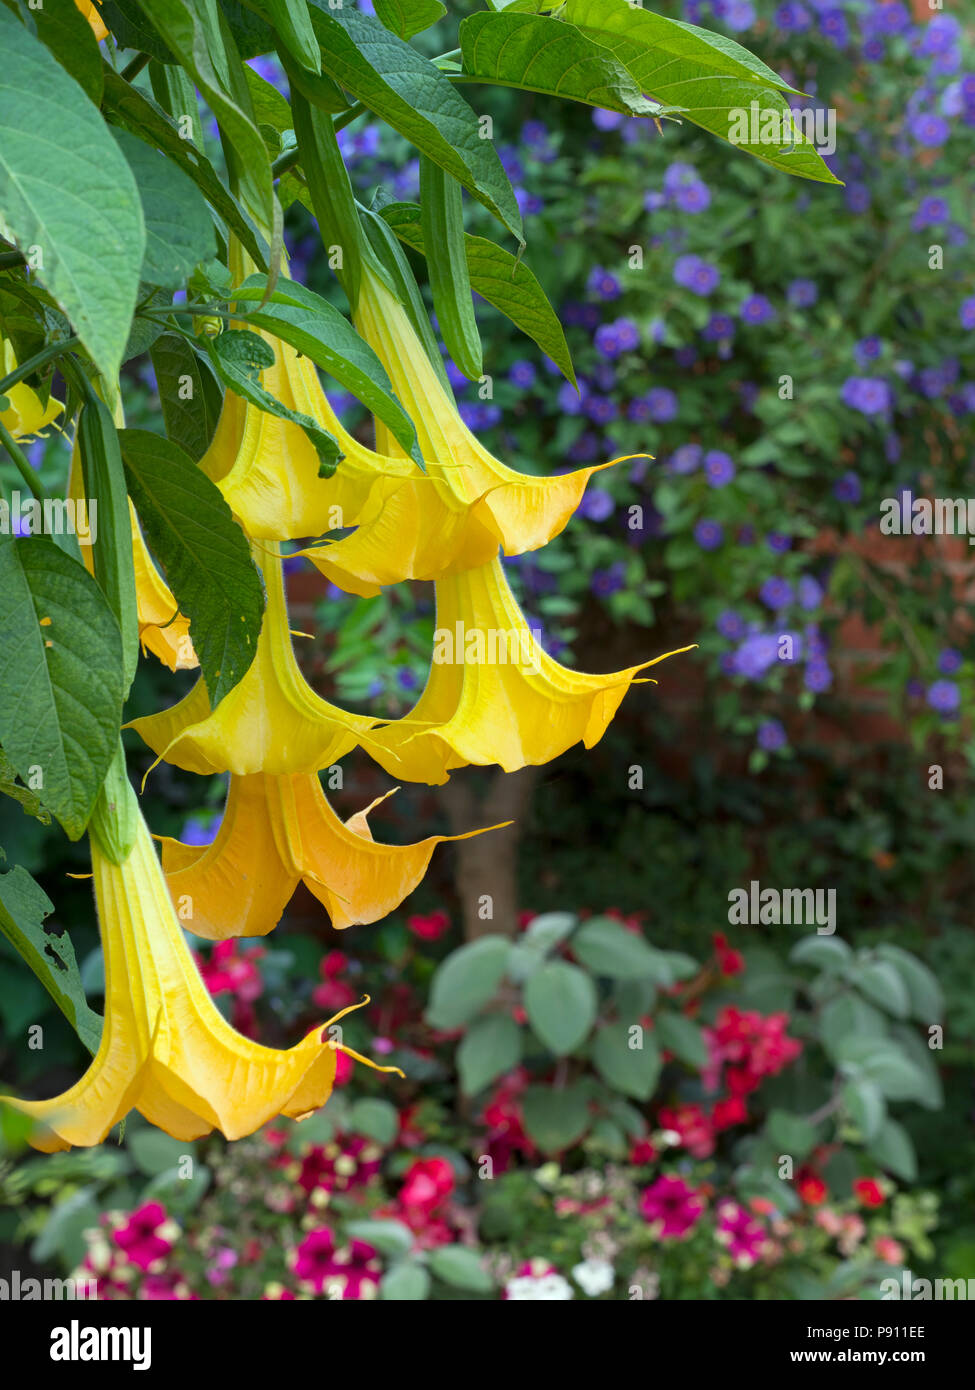 Brugmansia 'Feingold' Angel's trumpets Stock Photo